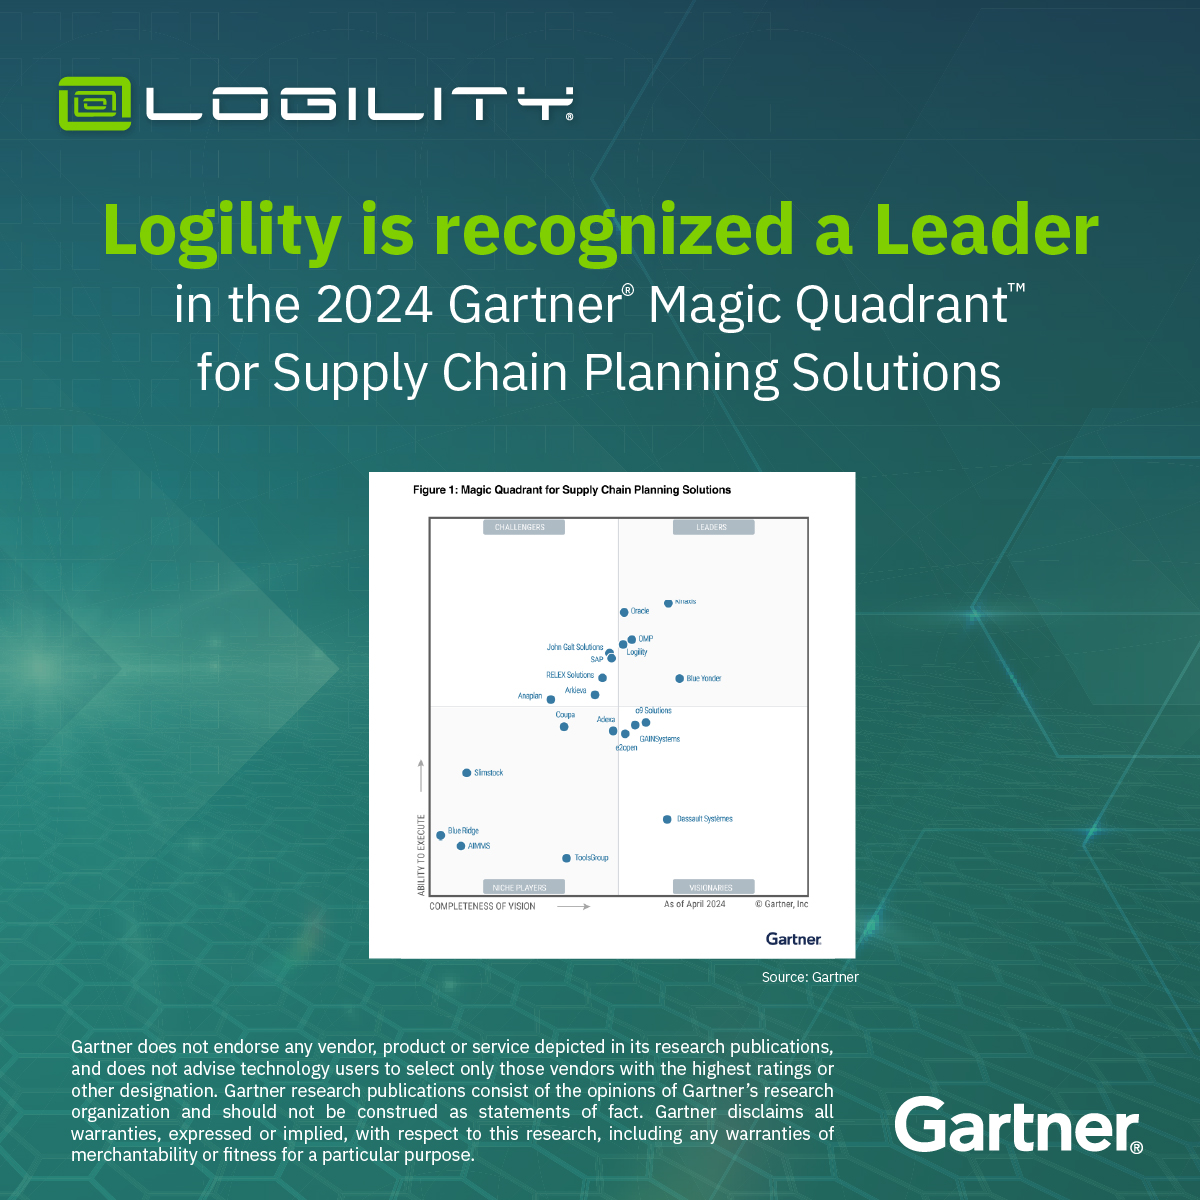 #Logility has been positioned as a Leader in the 2024 Gartner® Magic Quadrant™ for Supply Chain Planning Solutions. For more insights, read the full, complimentary report here 🌐 bit.ly/3Uk1Ug2
#AIfirst #supplychainsolutions #magicquadrant #GartnerMQ
@Gartner_inc